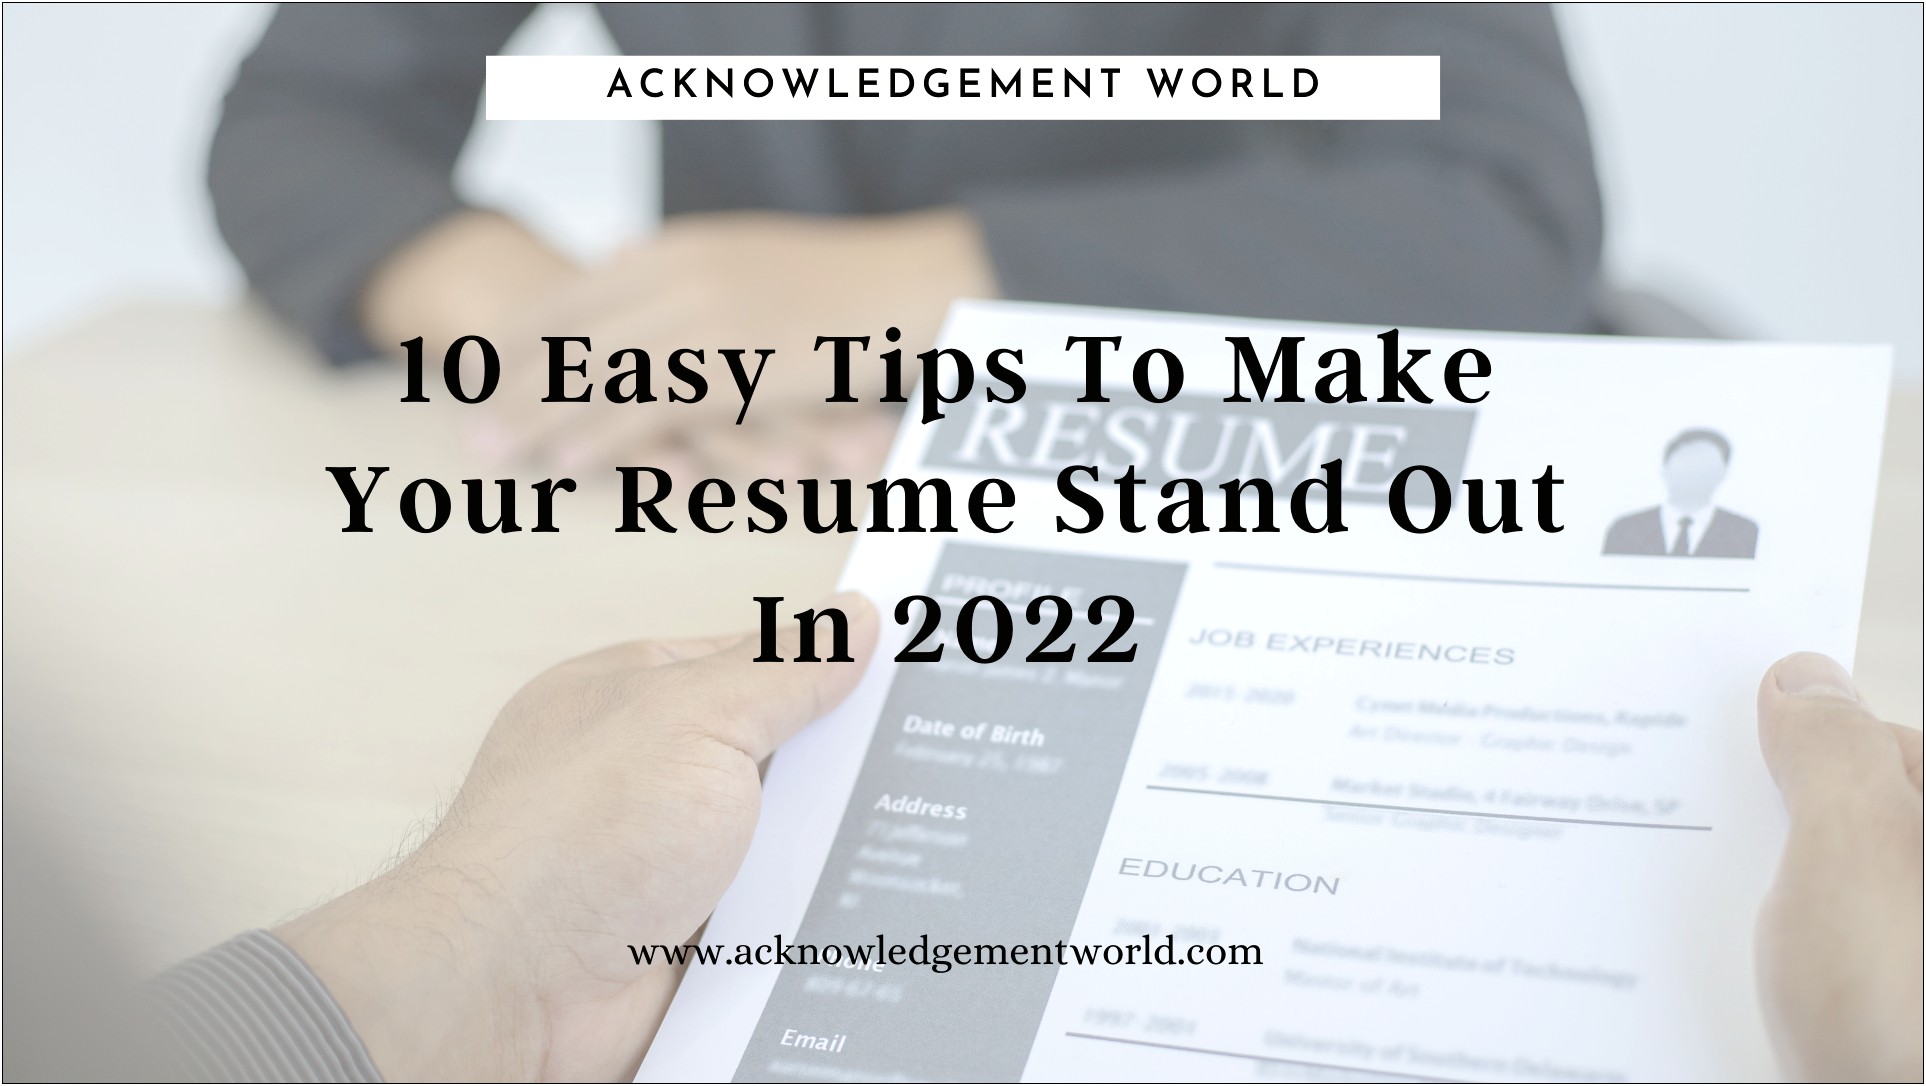 Best Way To Make Your Resume Stand Out